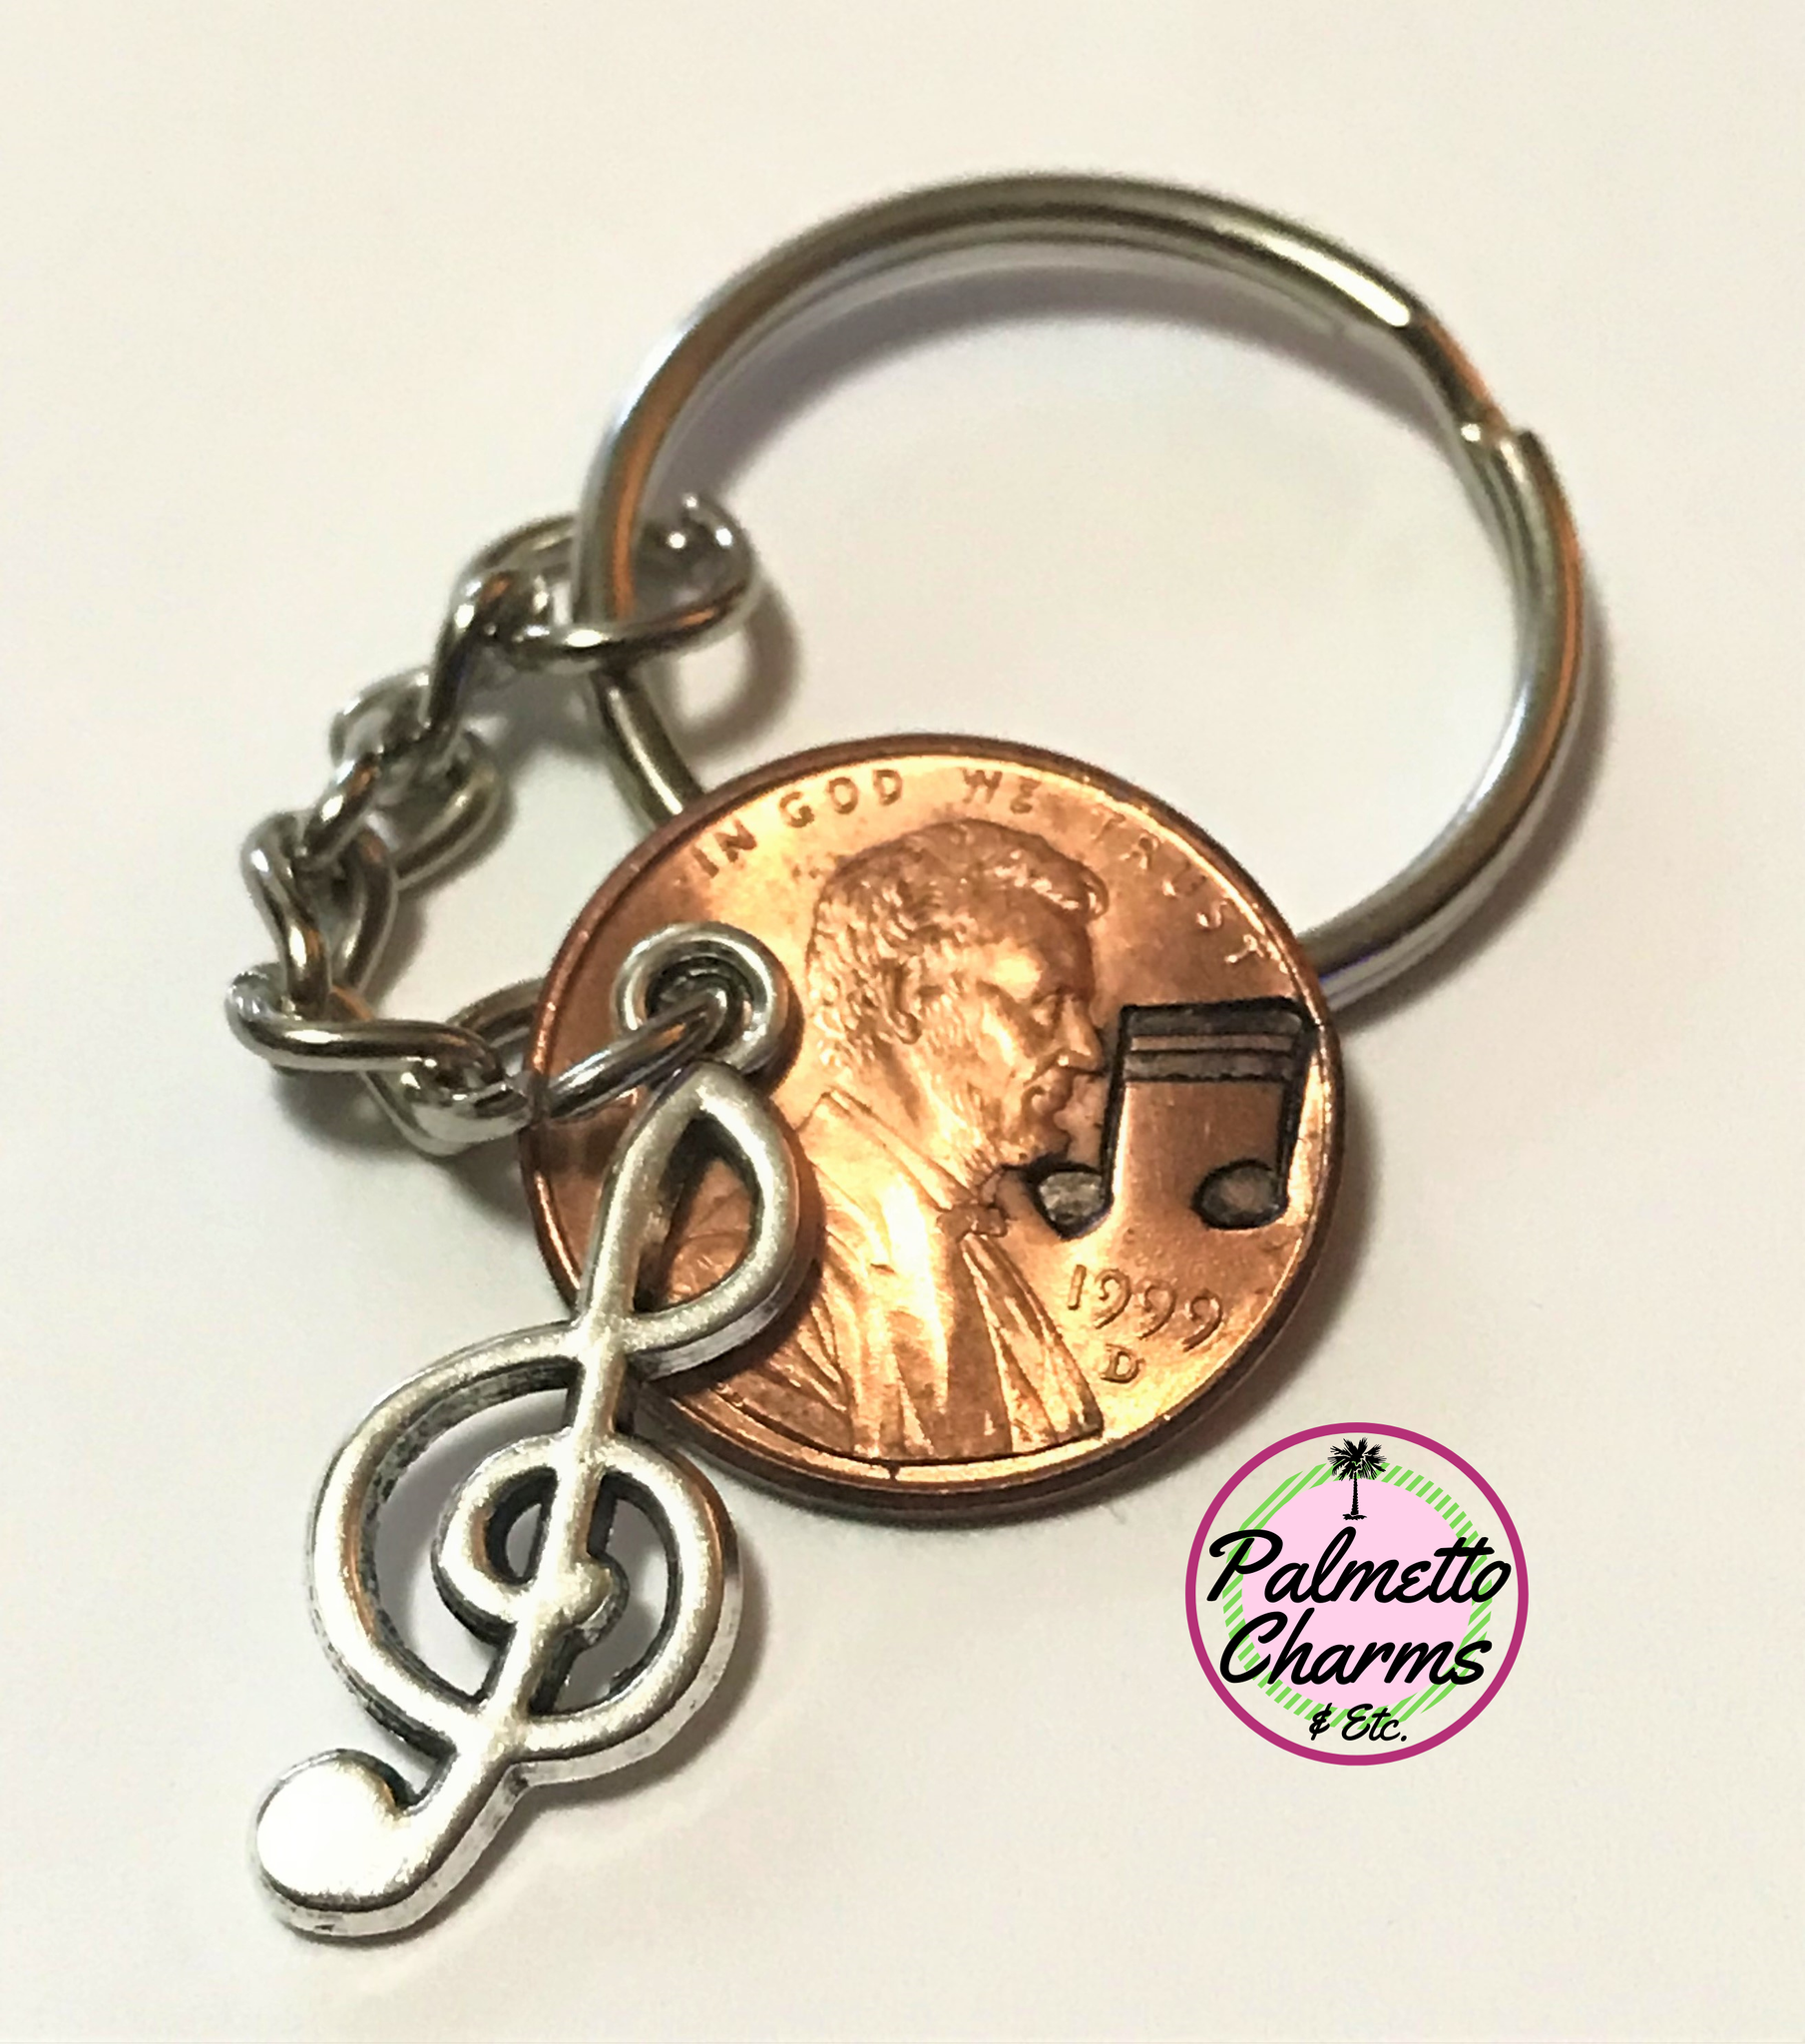 The Musical Note Charm on this Keychain is a perfect gift for the Musician in your life!